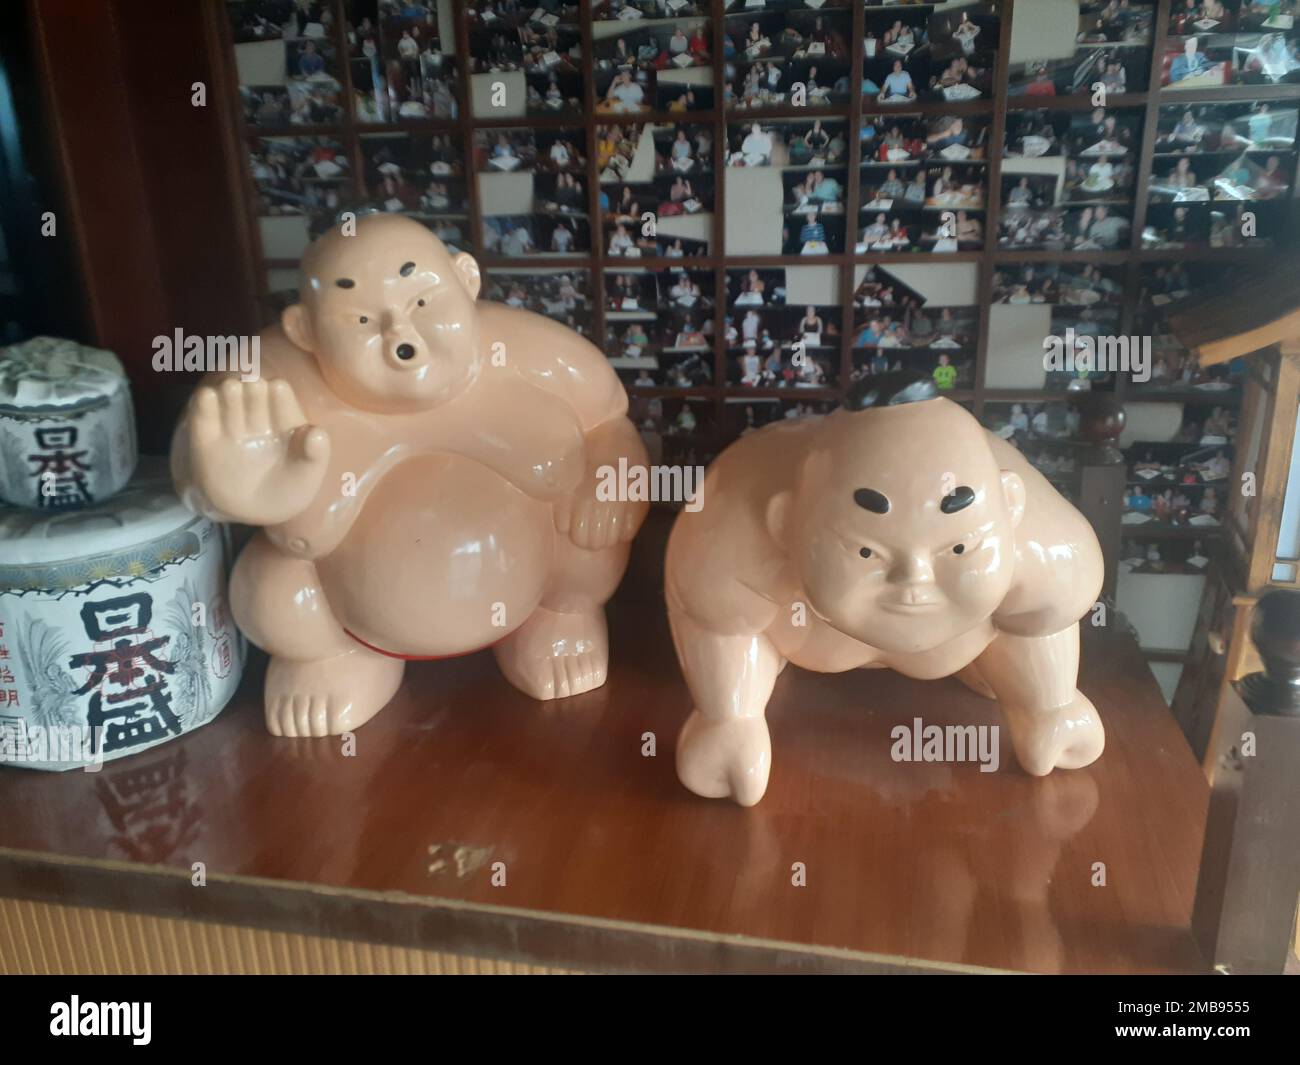 A closeup of funny figurines of sumo wrestlers Stock Photo